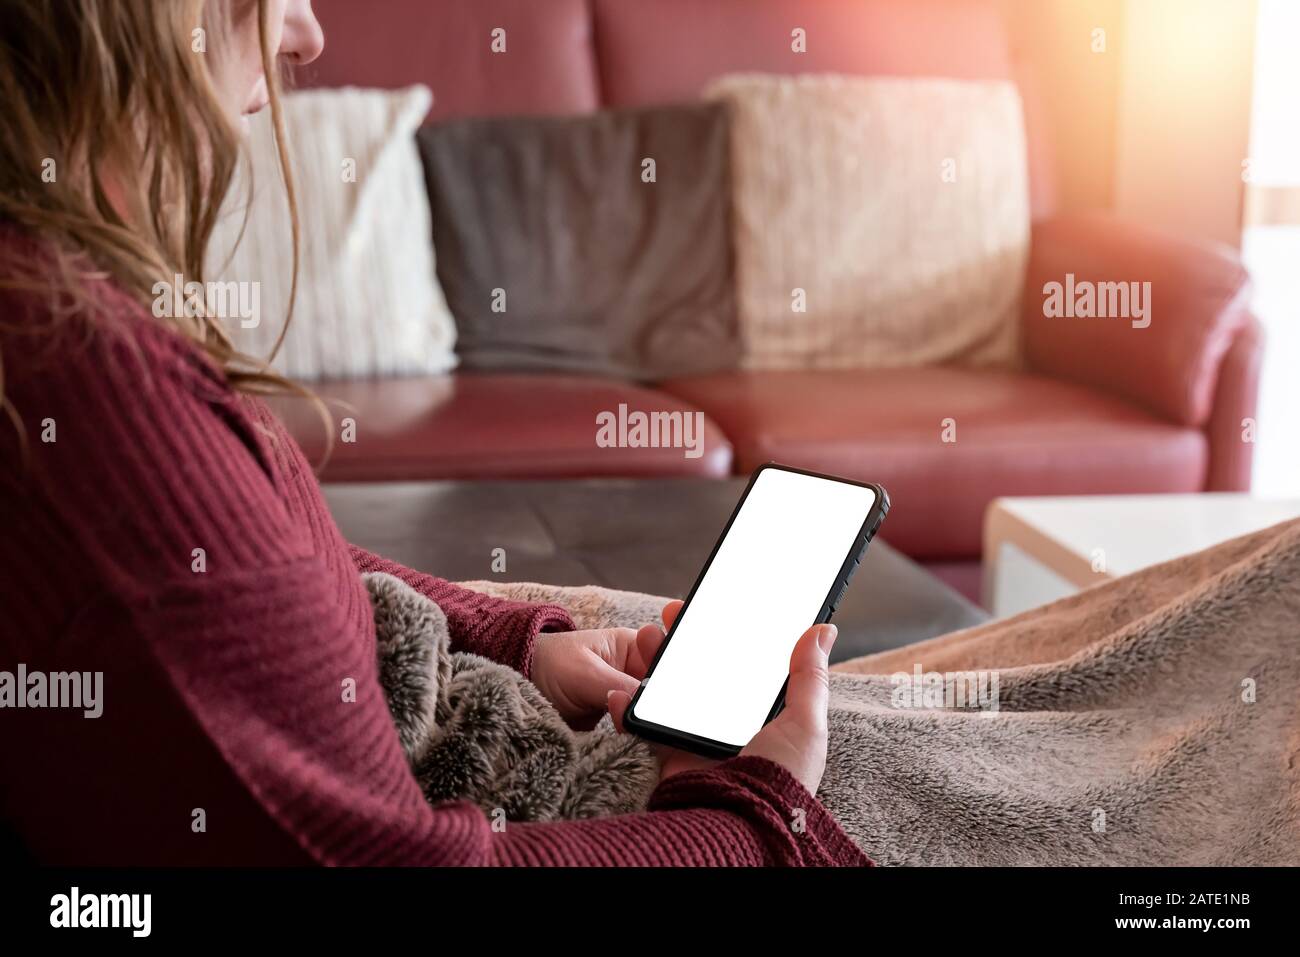 A middle-aged woman is lying on the couch at home. She looks at smartphone. Copy space for your own designs. Red ambience. Stock Photo